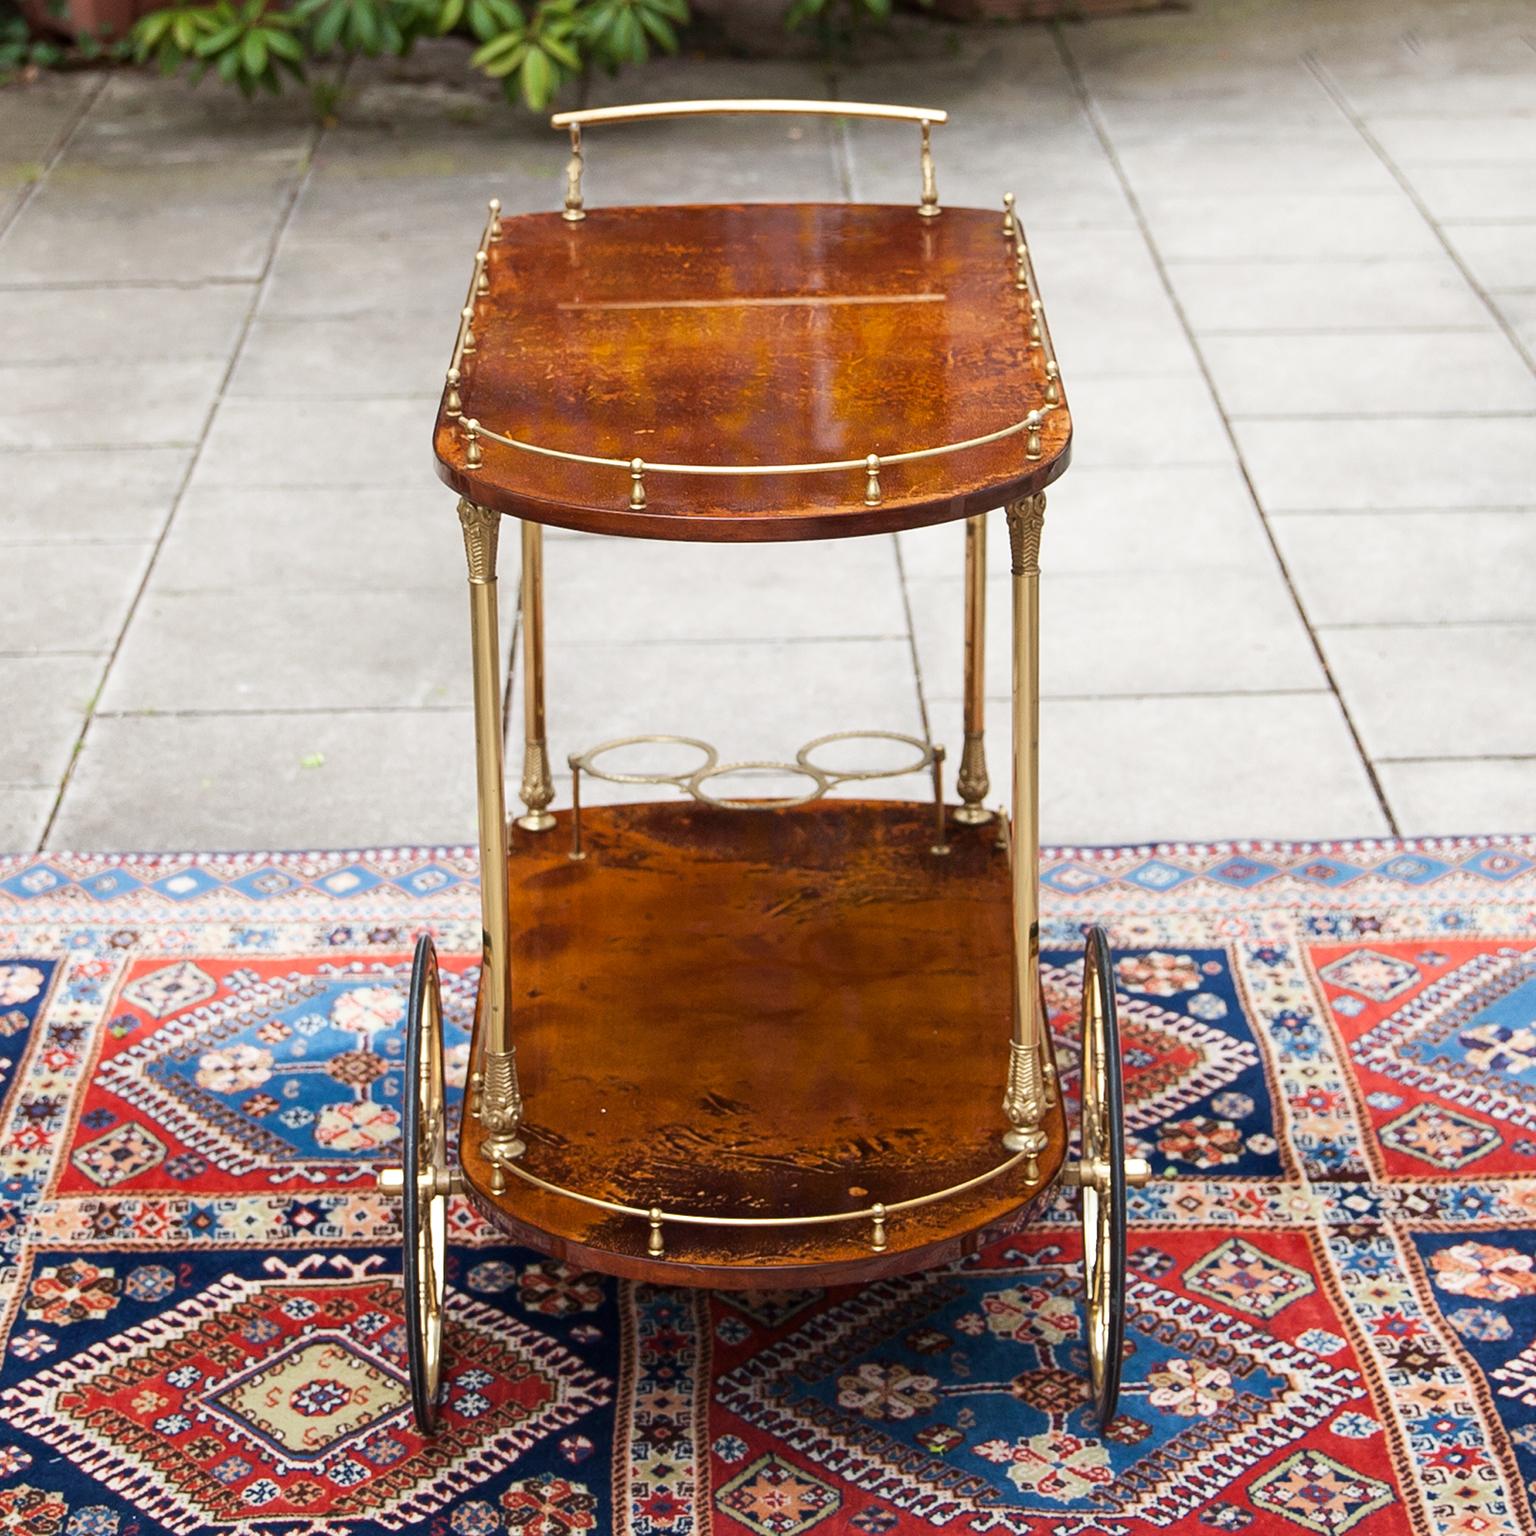 Aldo Tura bar cart lacquered in light brown with golden brass applications and a bottle holder. This particular bar cart was executed, circa 1960 and is in excellent vintage condition. The surface was new polished and has no scratches on the